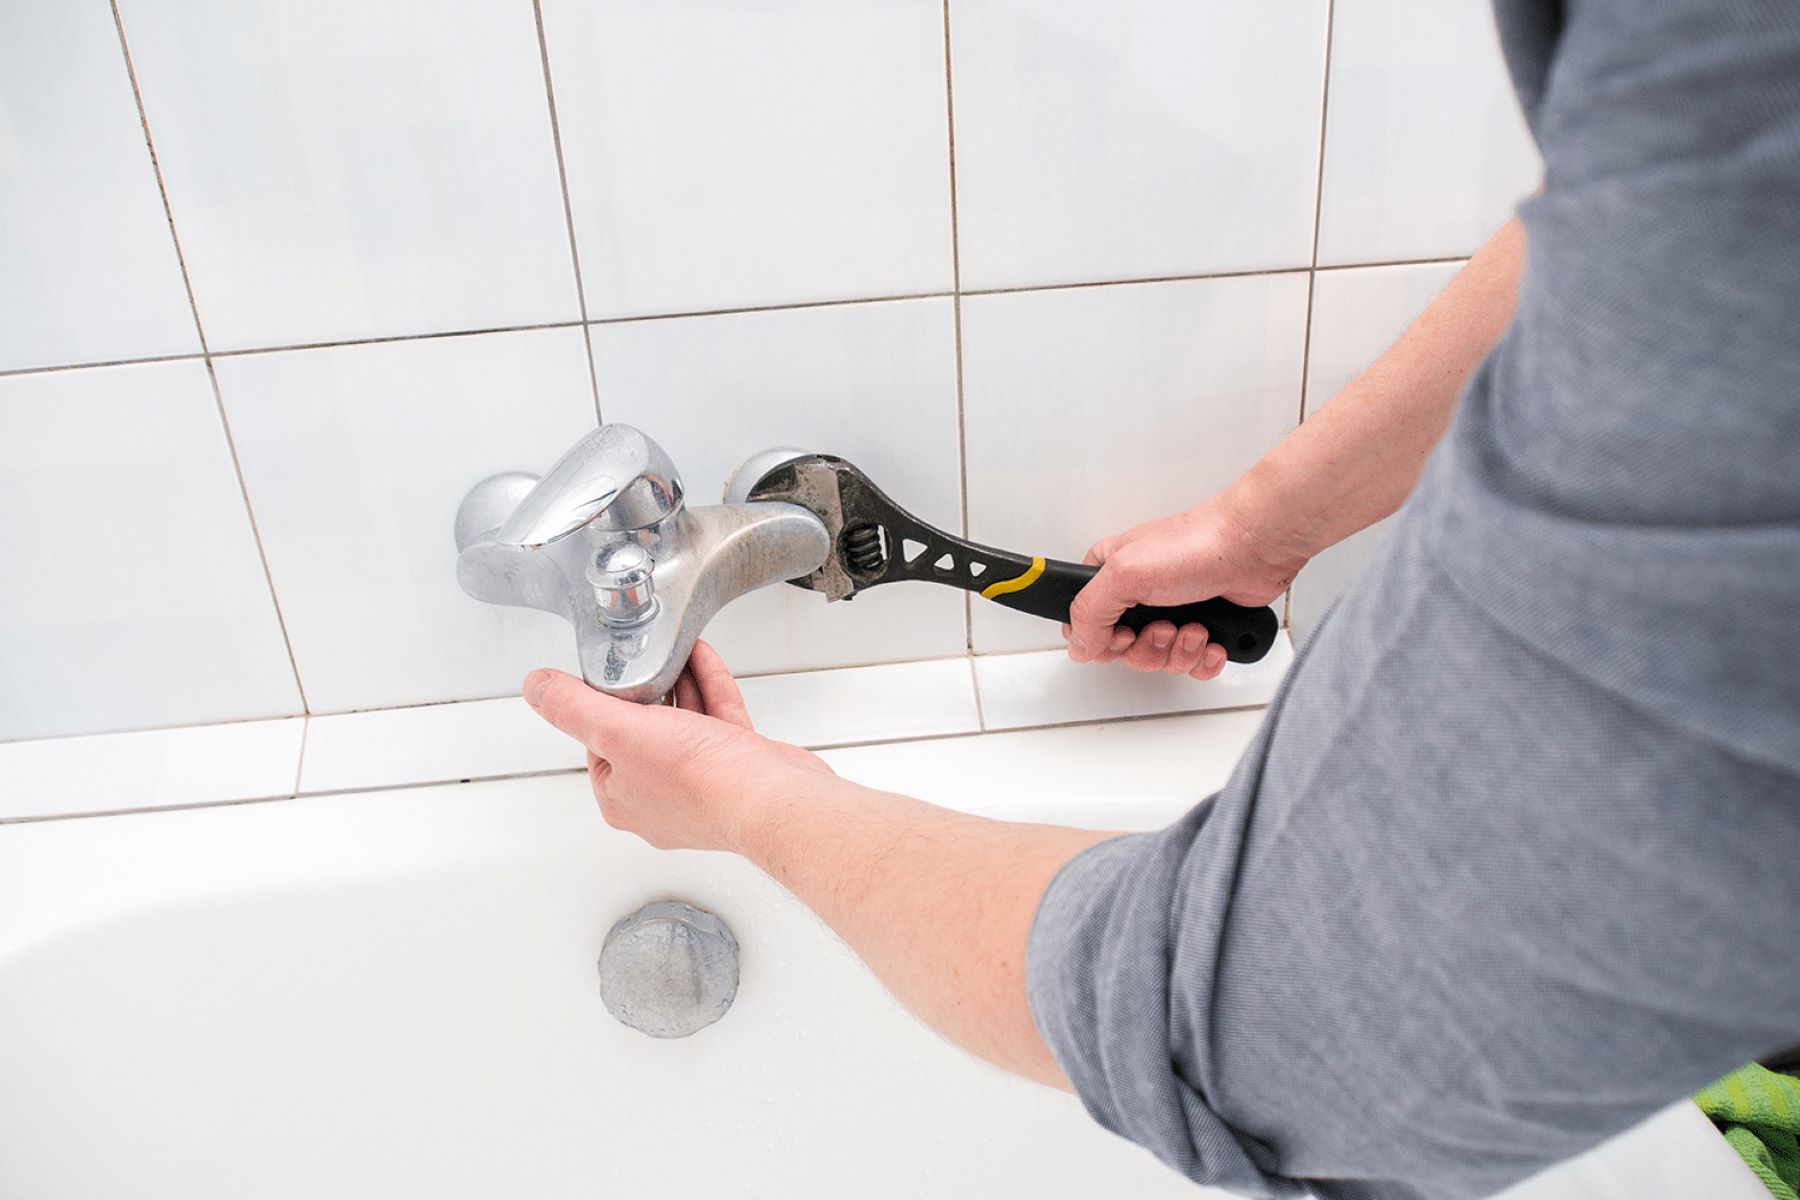 Stop A Leaking Bathtub Faucet Drip With These Genius Hacks!